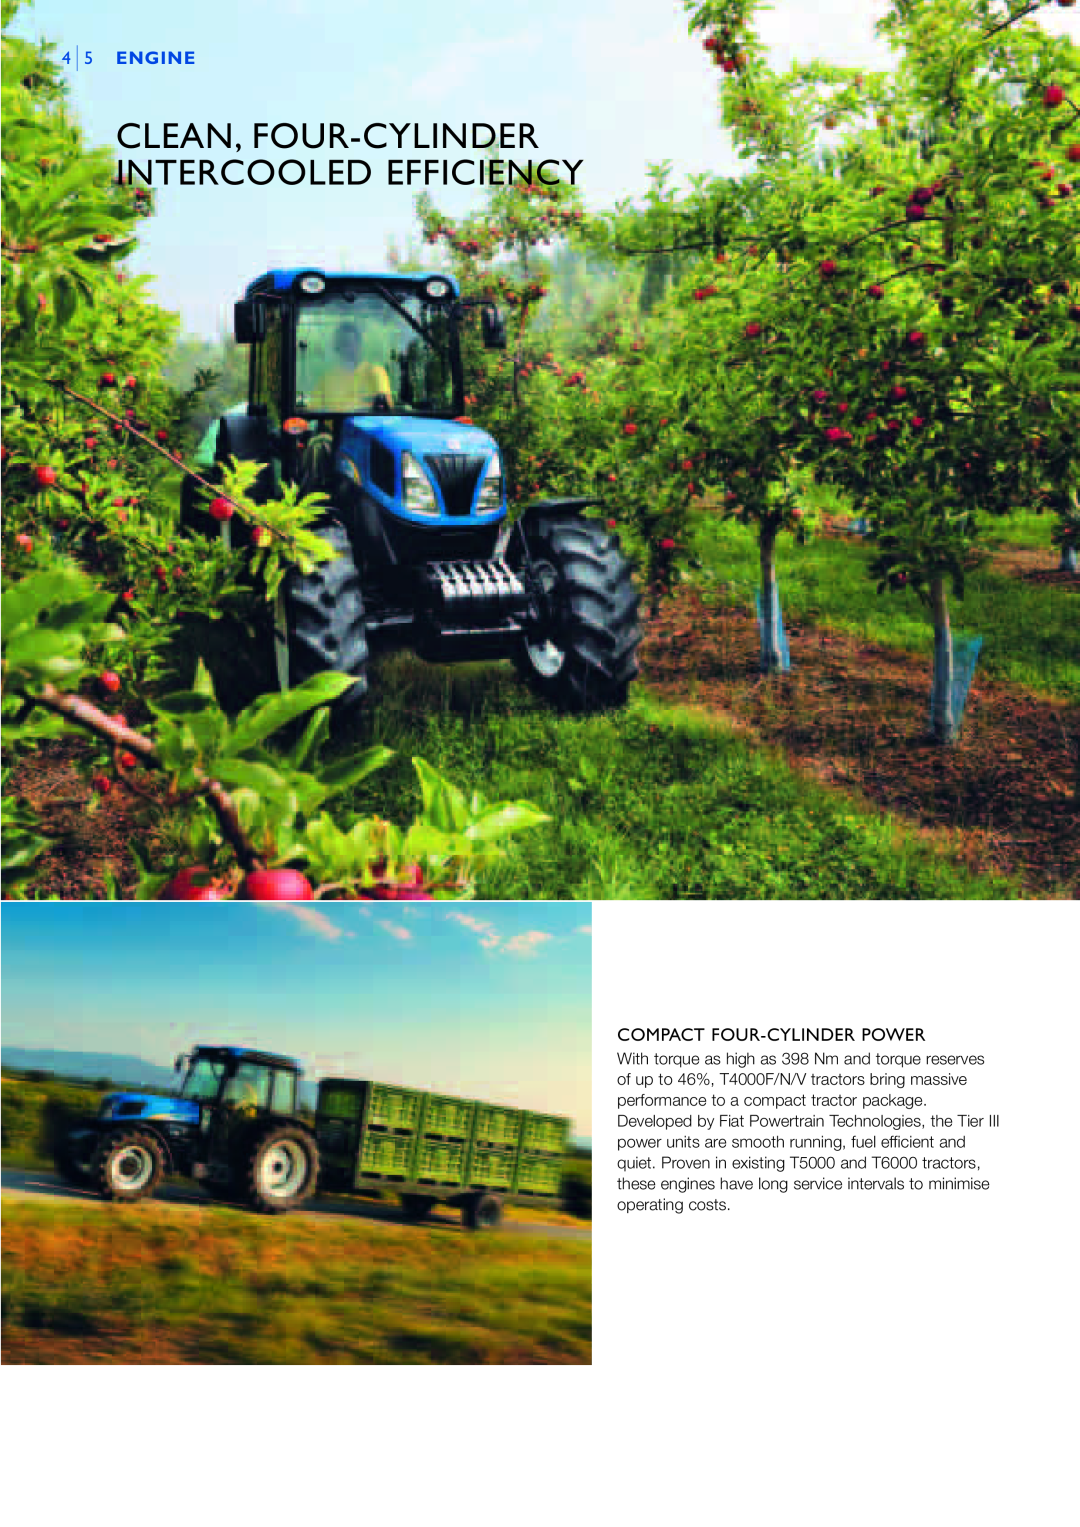 New Holland T4O5O, T4O4O, T4O3O manual Clean, Four-Cylinder Intercooled Efficiency, 4 5 ENGINE, Compact Four-Cylinderpower 